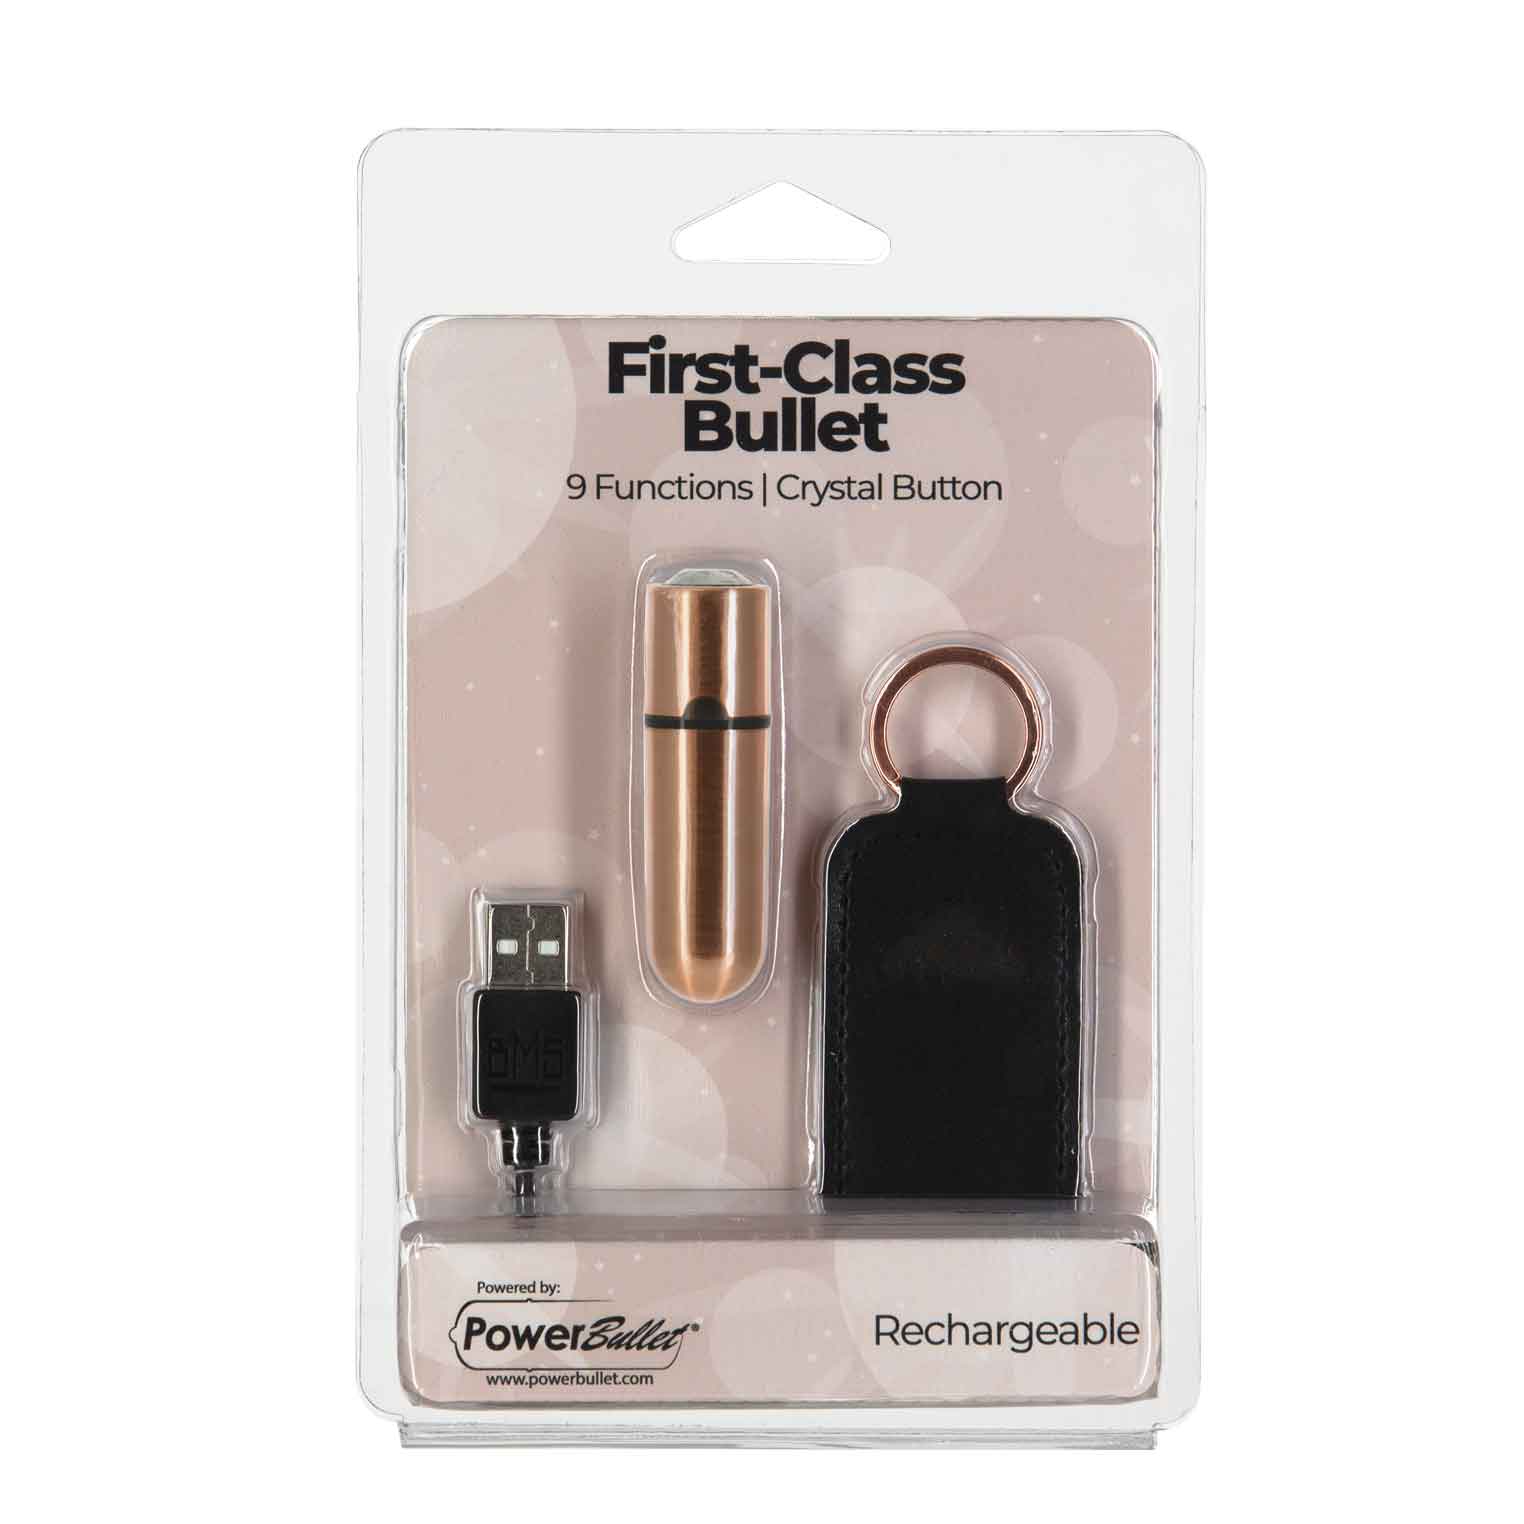 First-Class Bullet - 2.5" Bullet Vibrator with Key Chain Pouch - Rose Gold